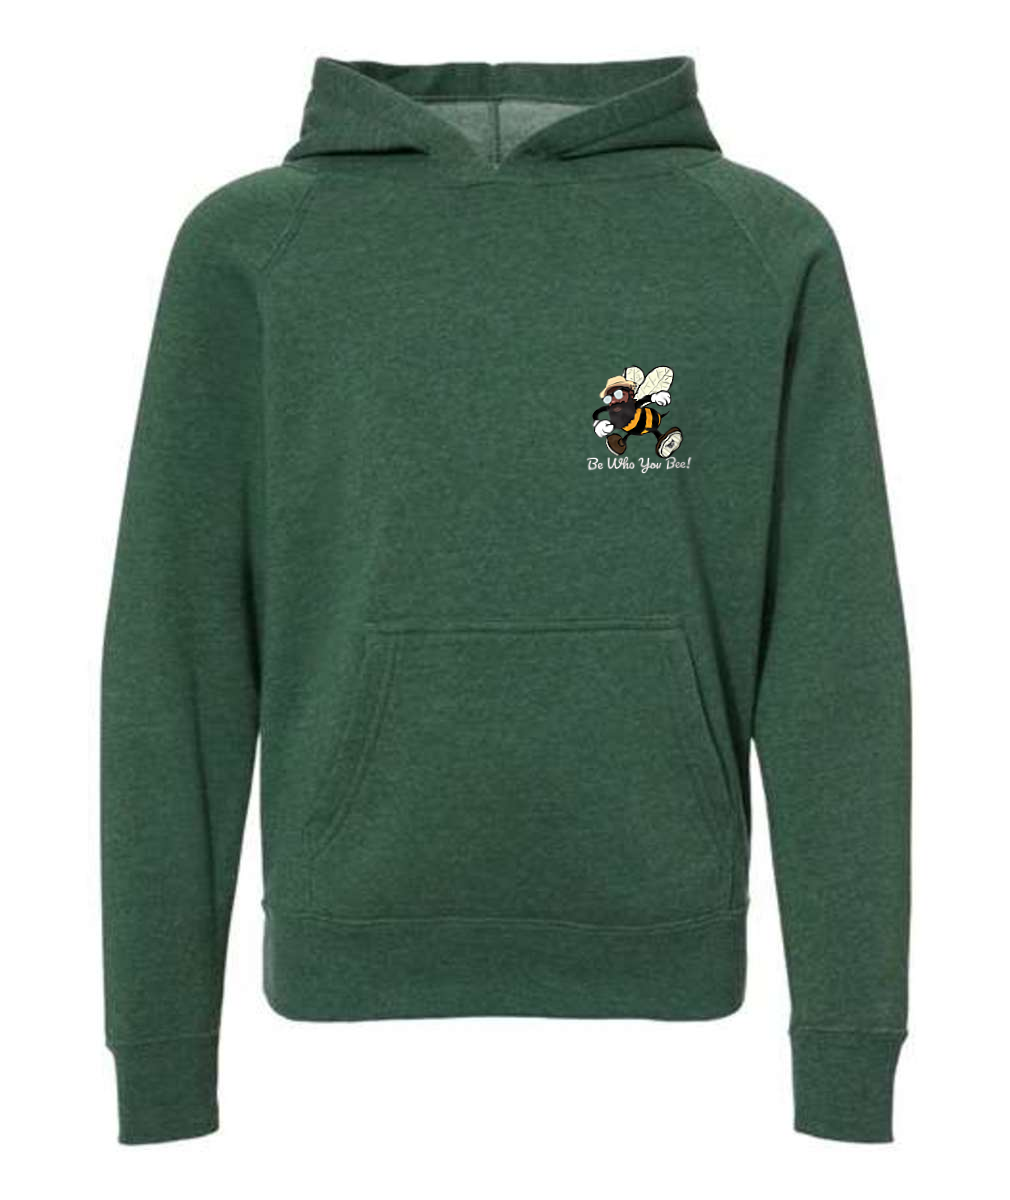 Be Who you Bee Embroidered Youth Special Blend Raglan Hooded Sweatshirt or Similar